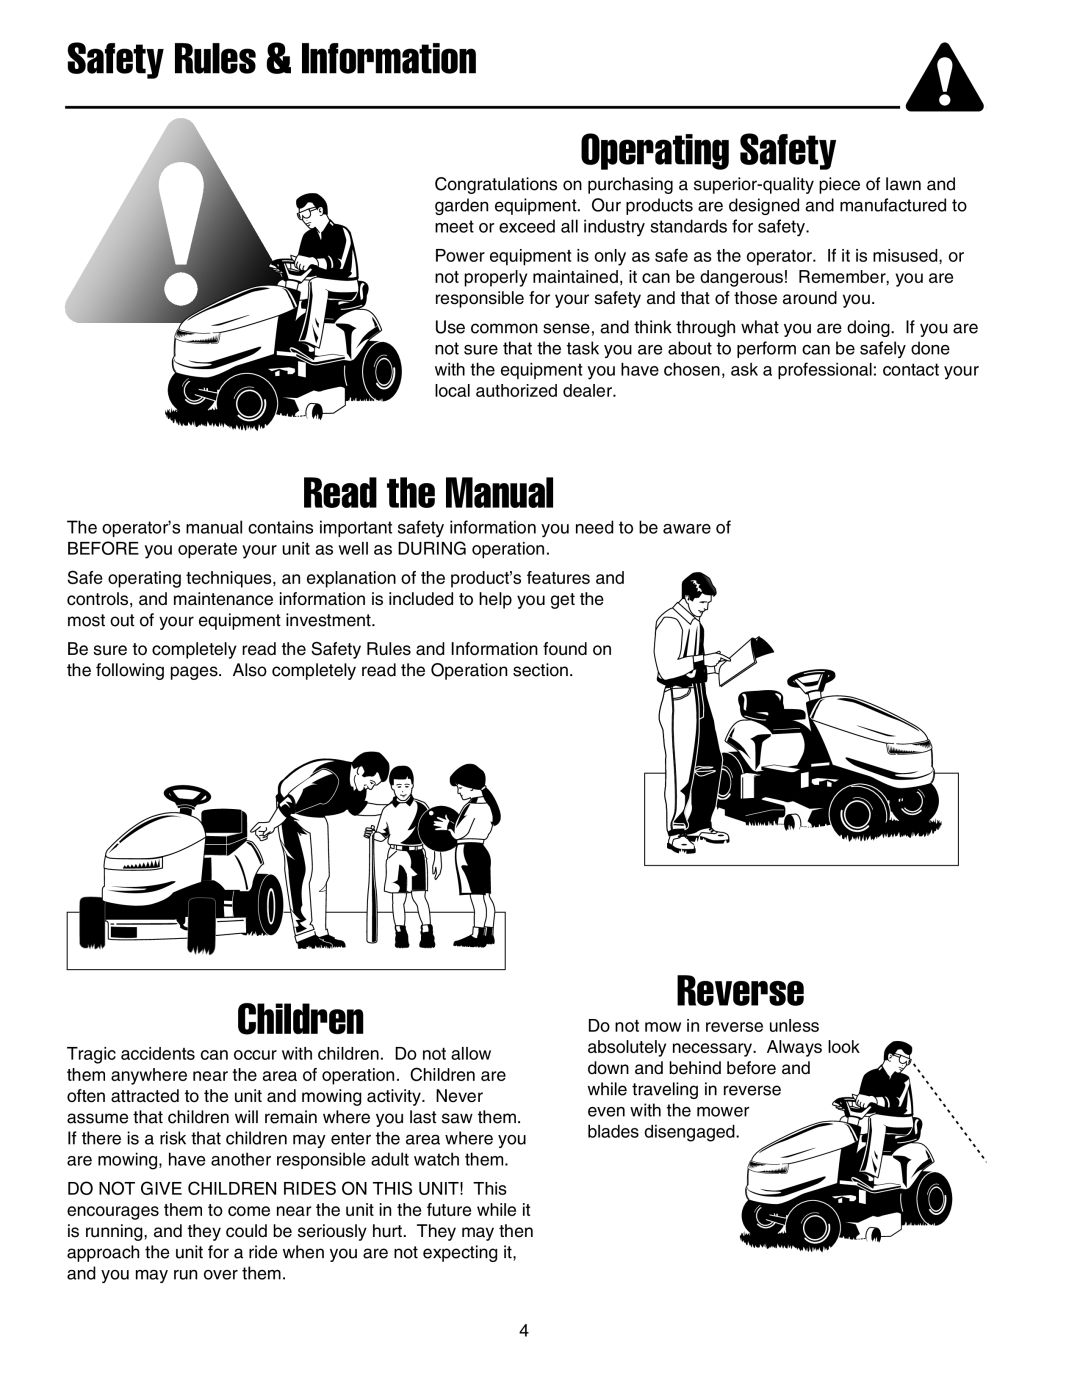 Snapper RE 200 manual Safety Rules & Information Operating Safety, Read the Manual, Children, Reverse 